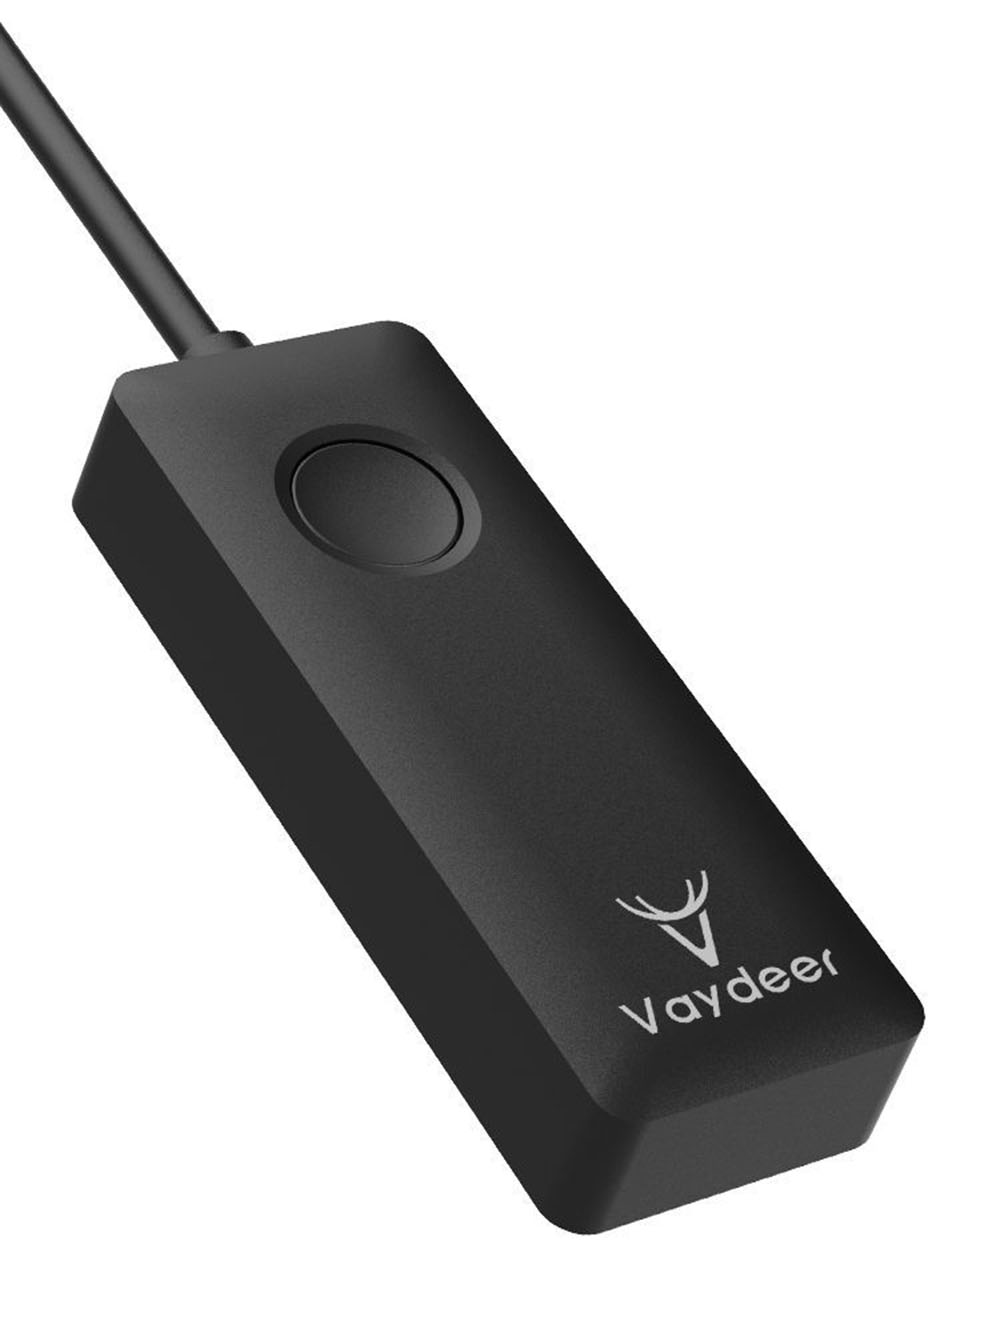 Vaydeer-FXMQ001-USB-Wired-Computer-Automatic-Mouse-Movers-Square-Anti-Dormant-Device-Analog-Driveles-1725113